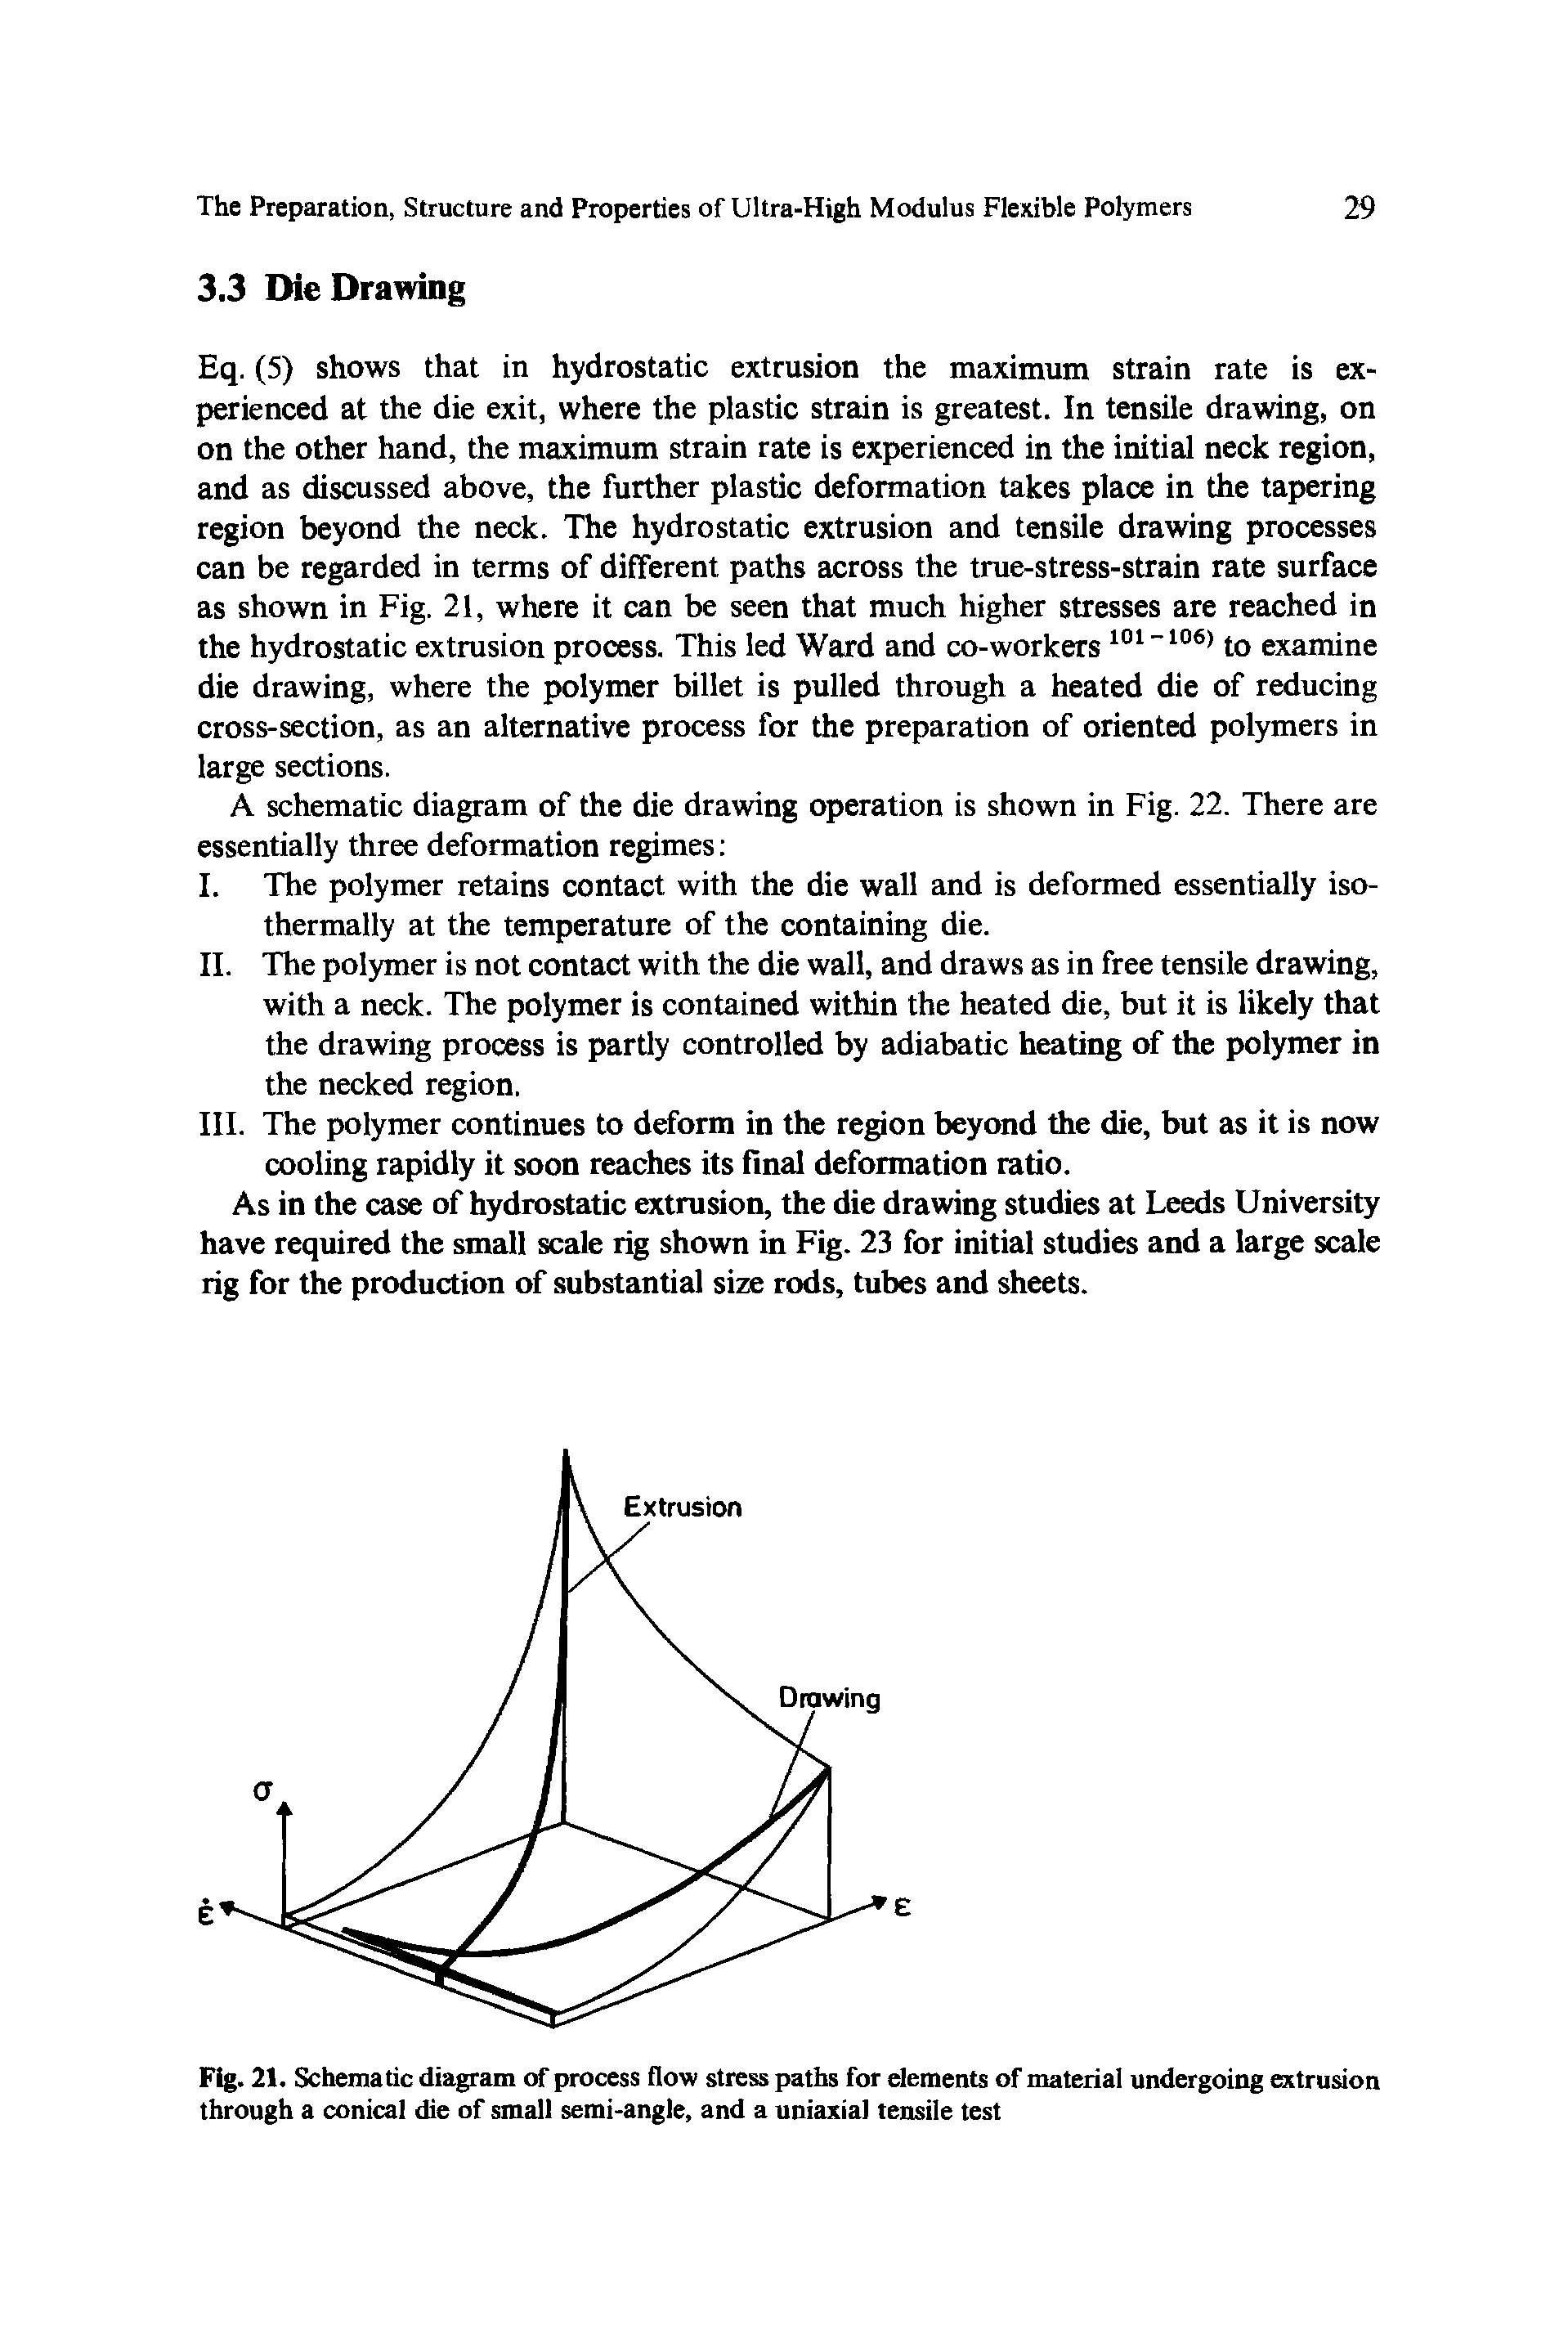 Fig. 21. Schematic diagram of process flow stress paths for elements of material undergoing extrusion through a conical die of small semi-angle, and a uniaxial tensile test...